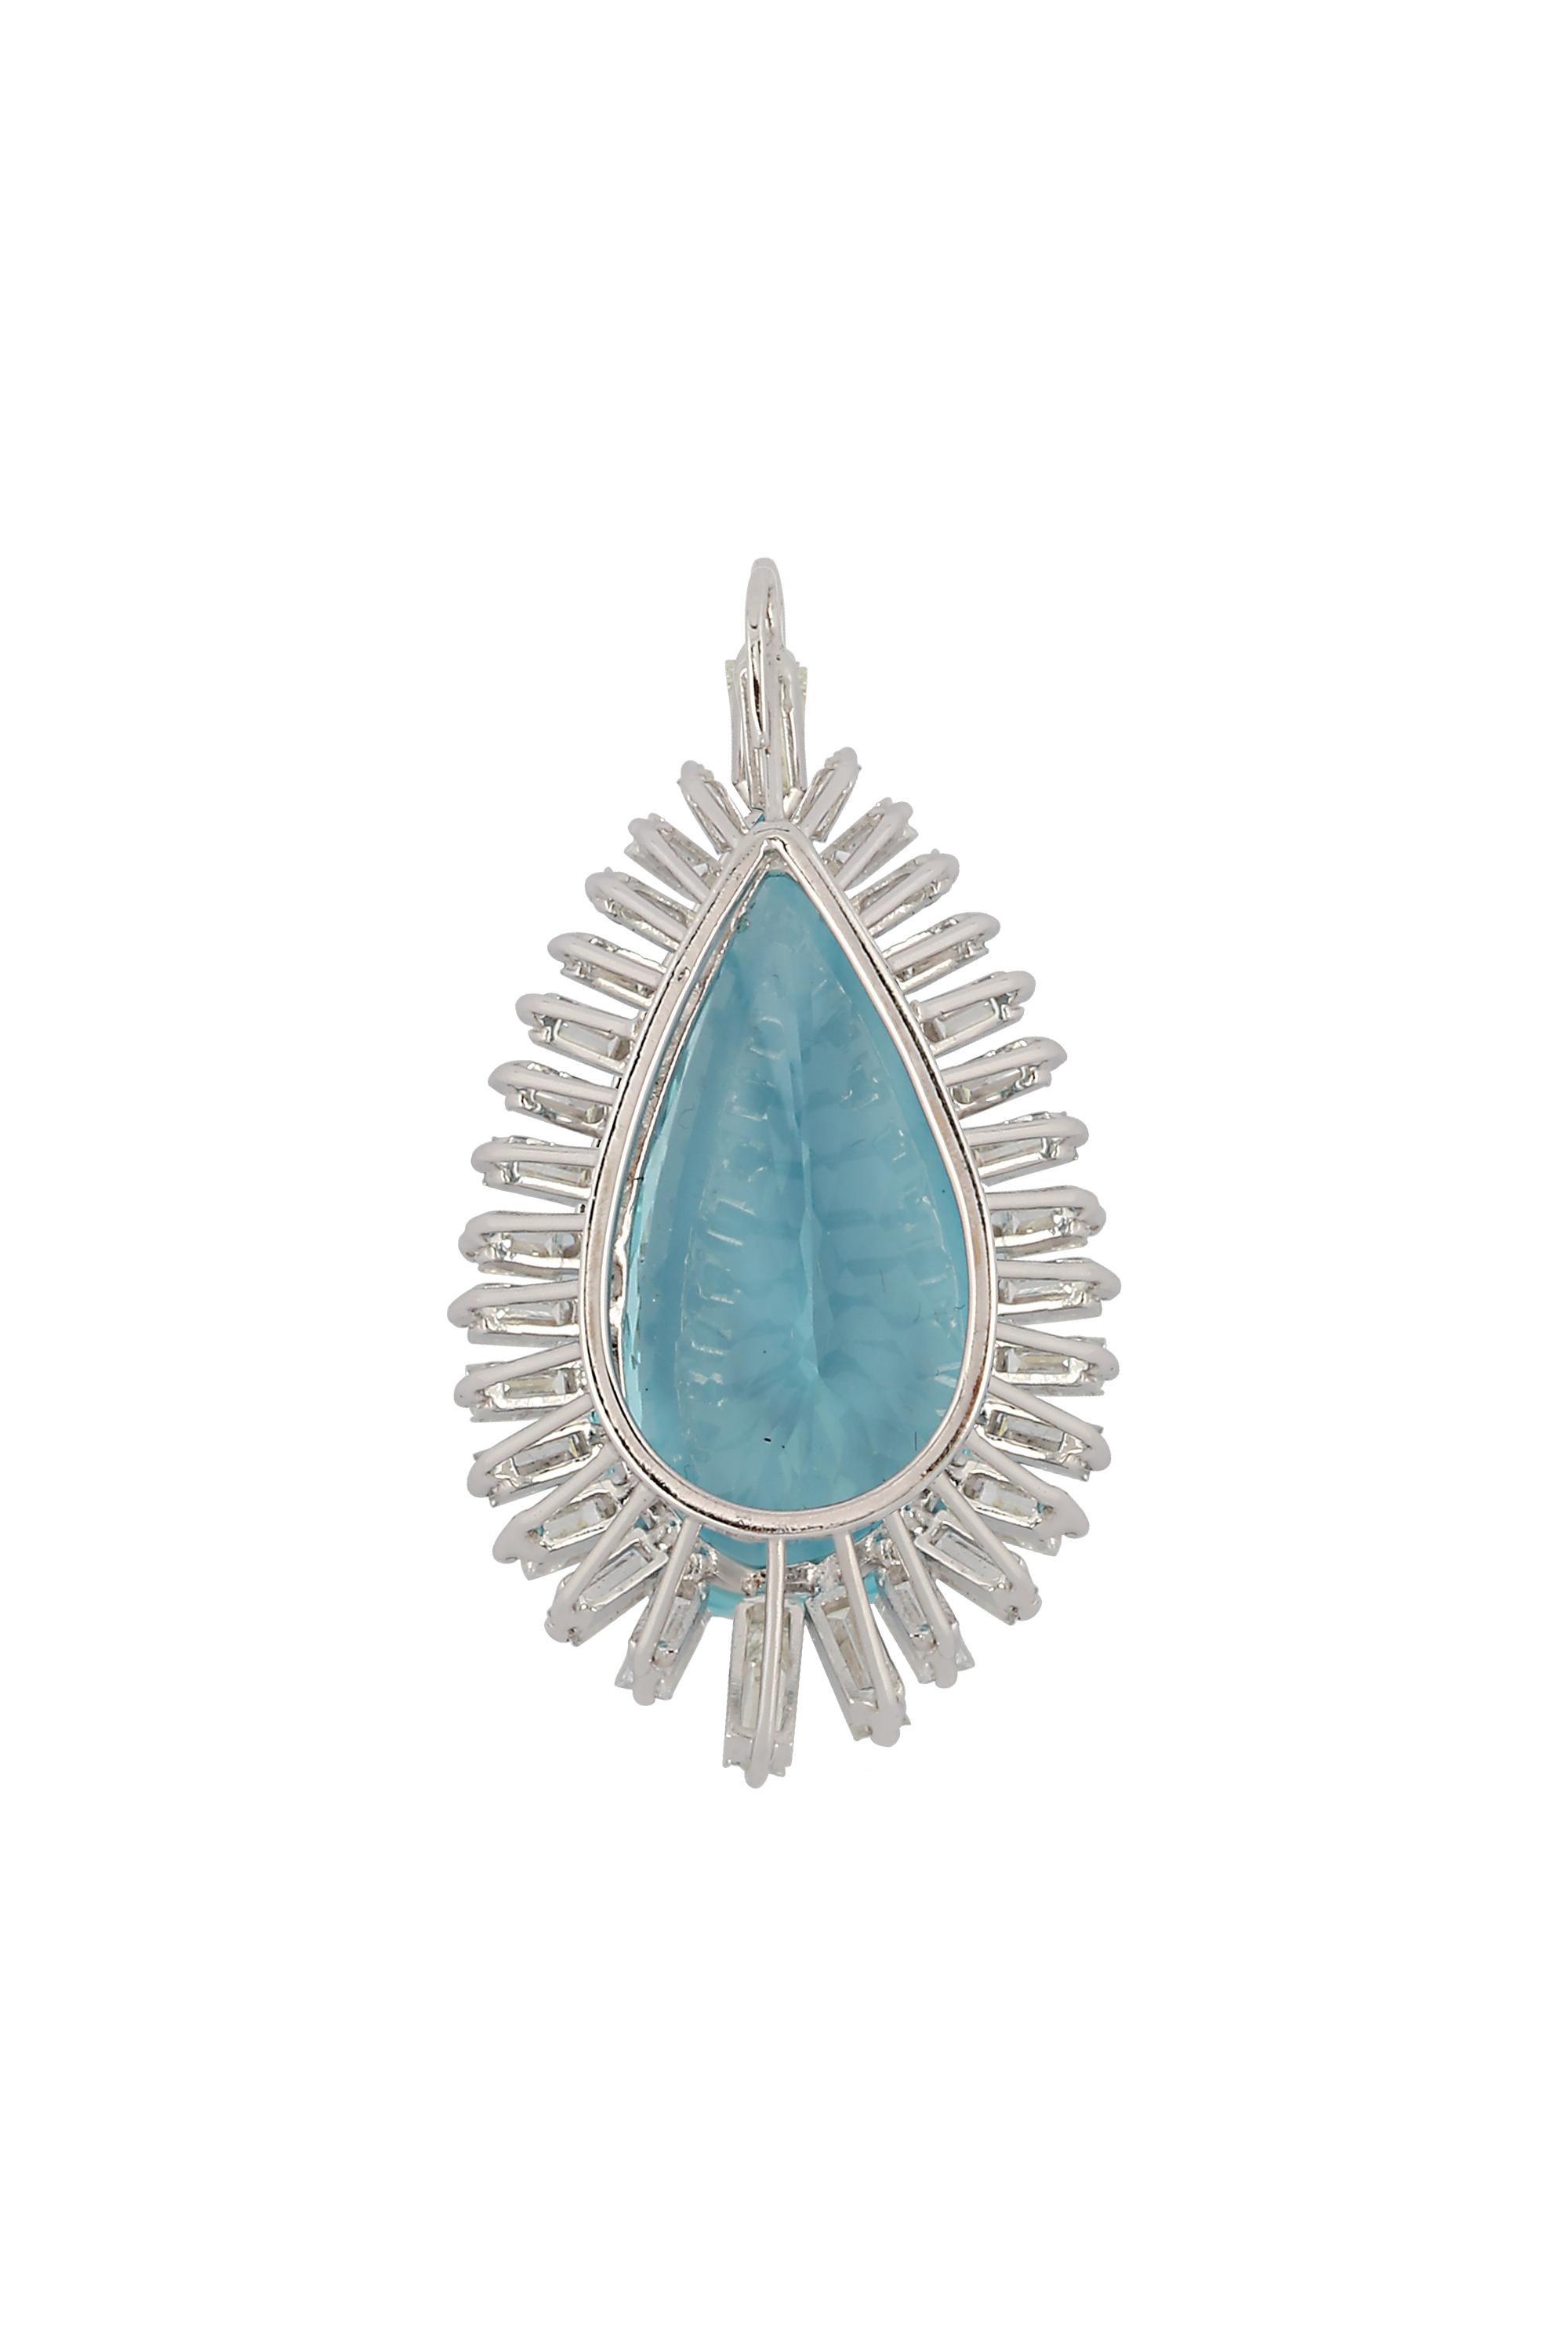 This engaging and distinctive pendant features a bright blue pear shaped aquamarine, weighing approximately 43 carats, beautifully framed by a dramatic halo of graduated diamond baguettes. Fabricated in 18- karat white gold. (Chain sold separately)

